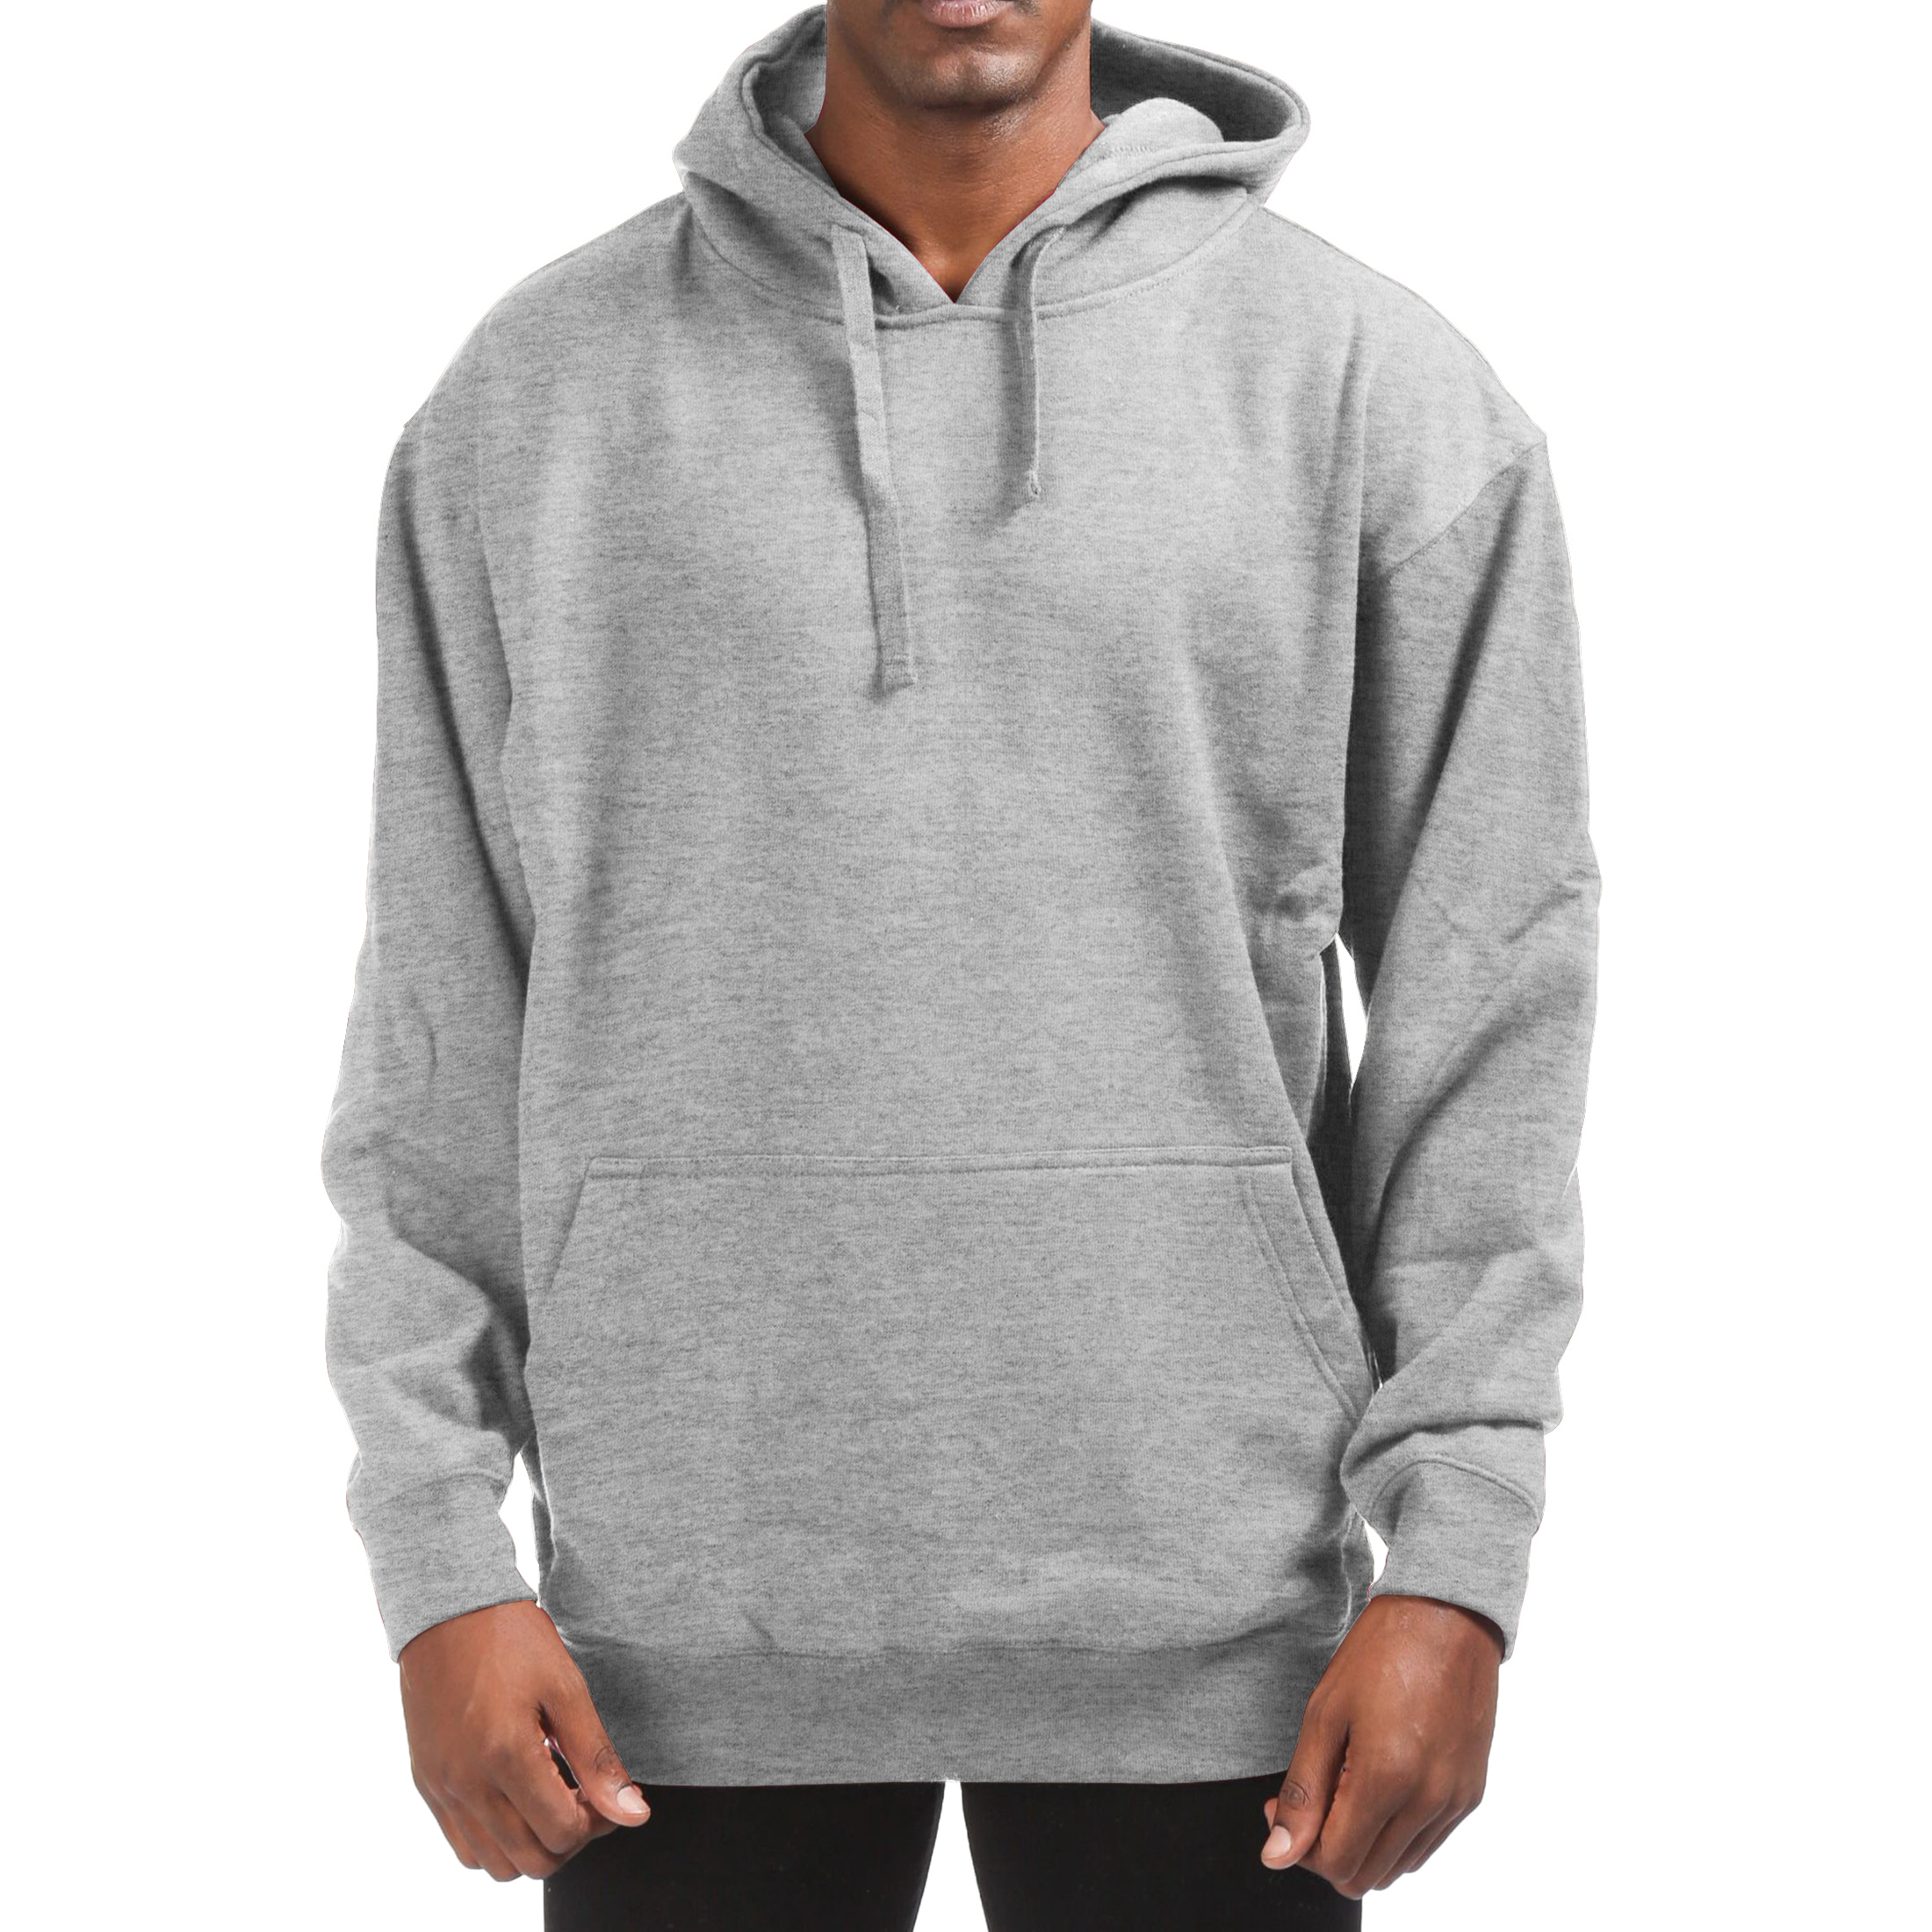 Men's Cotton-Blend Fleece Pullover Hoodie With Pocket (Big & Tall Sizes Available) - Gray, Large